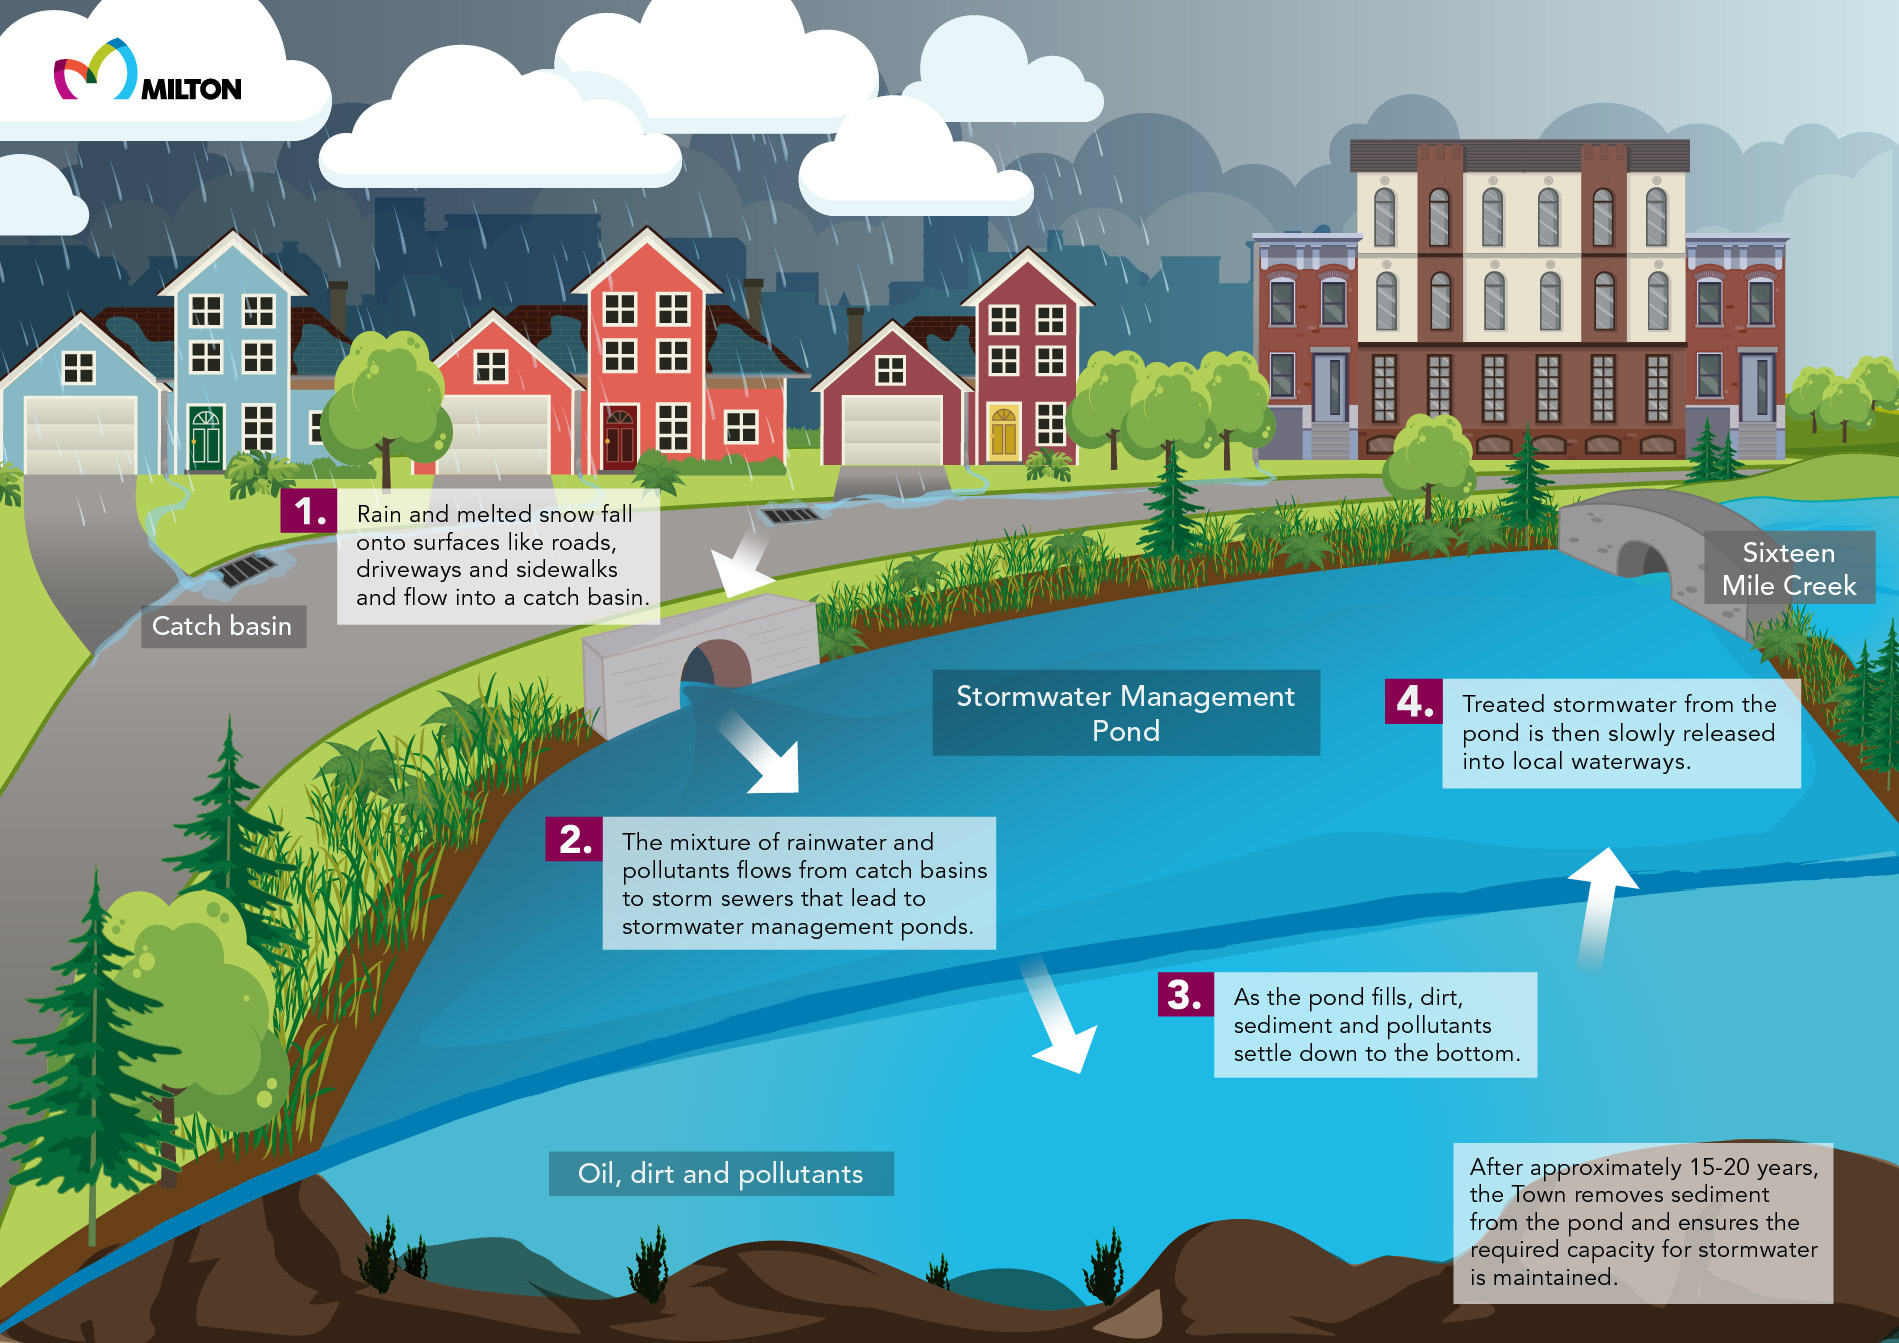 How Does Stormwater Management Design Help Mitigate Nutrient Pollution?